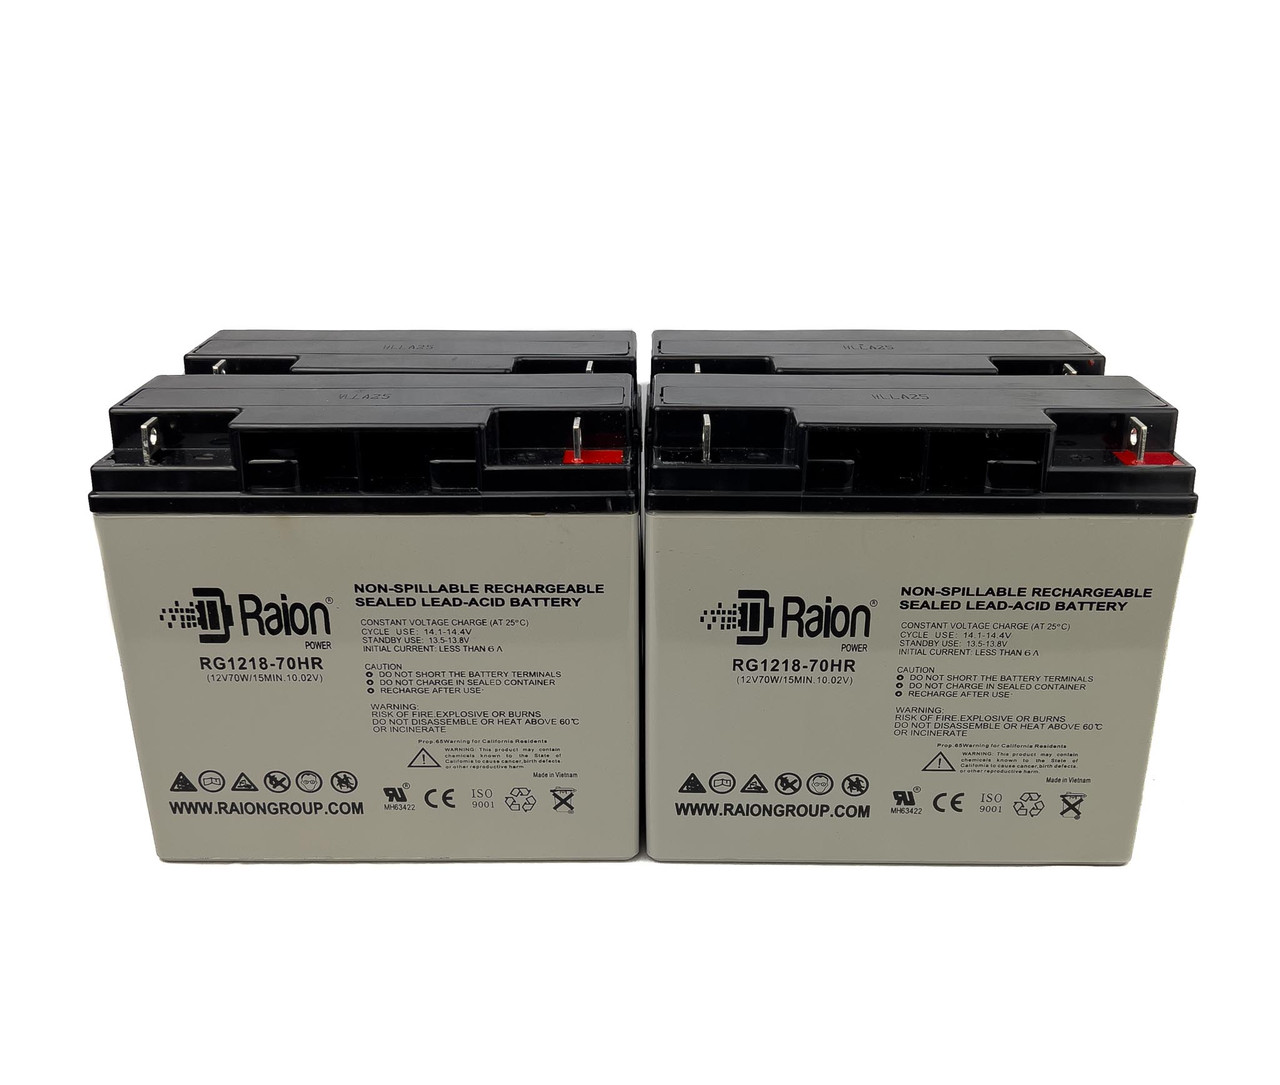 Raion Power RG1218-70HR 12V 18Ah Replacement UPS Battery for APC AP1400 - 4 Pack